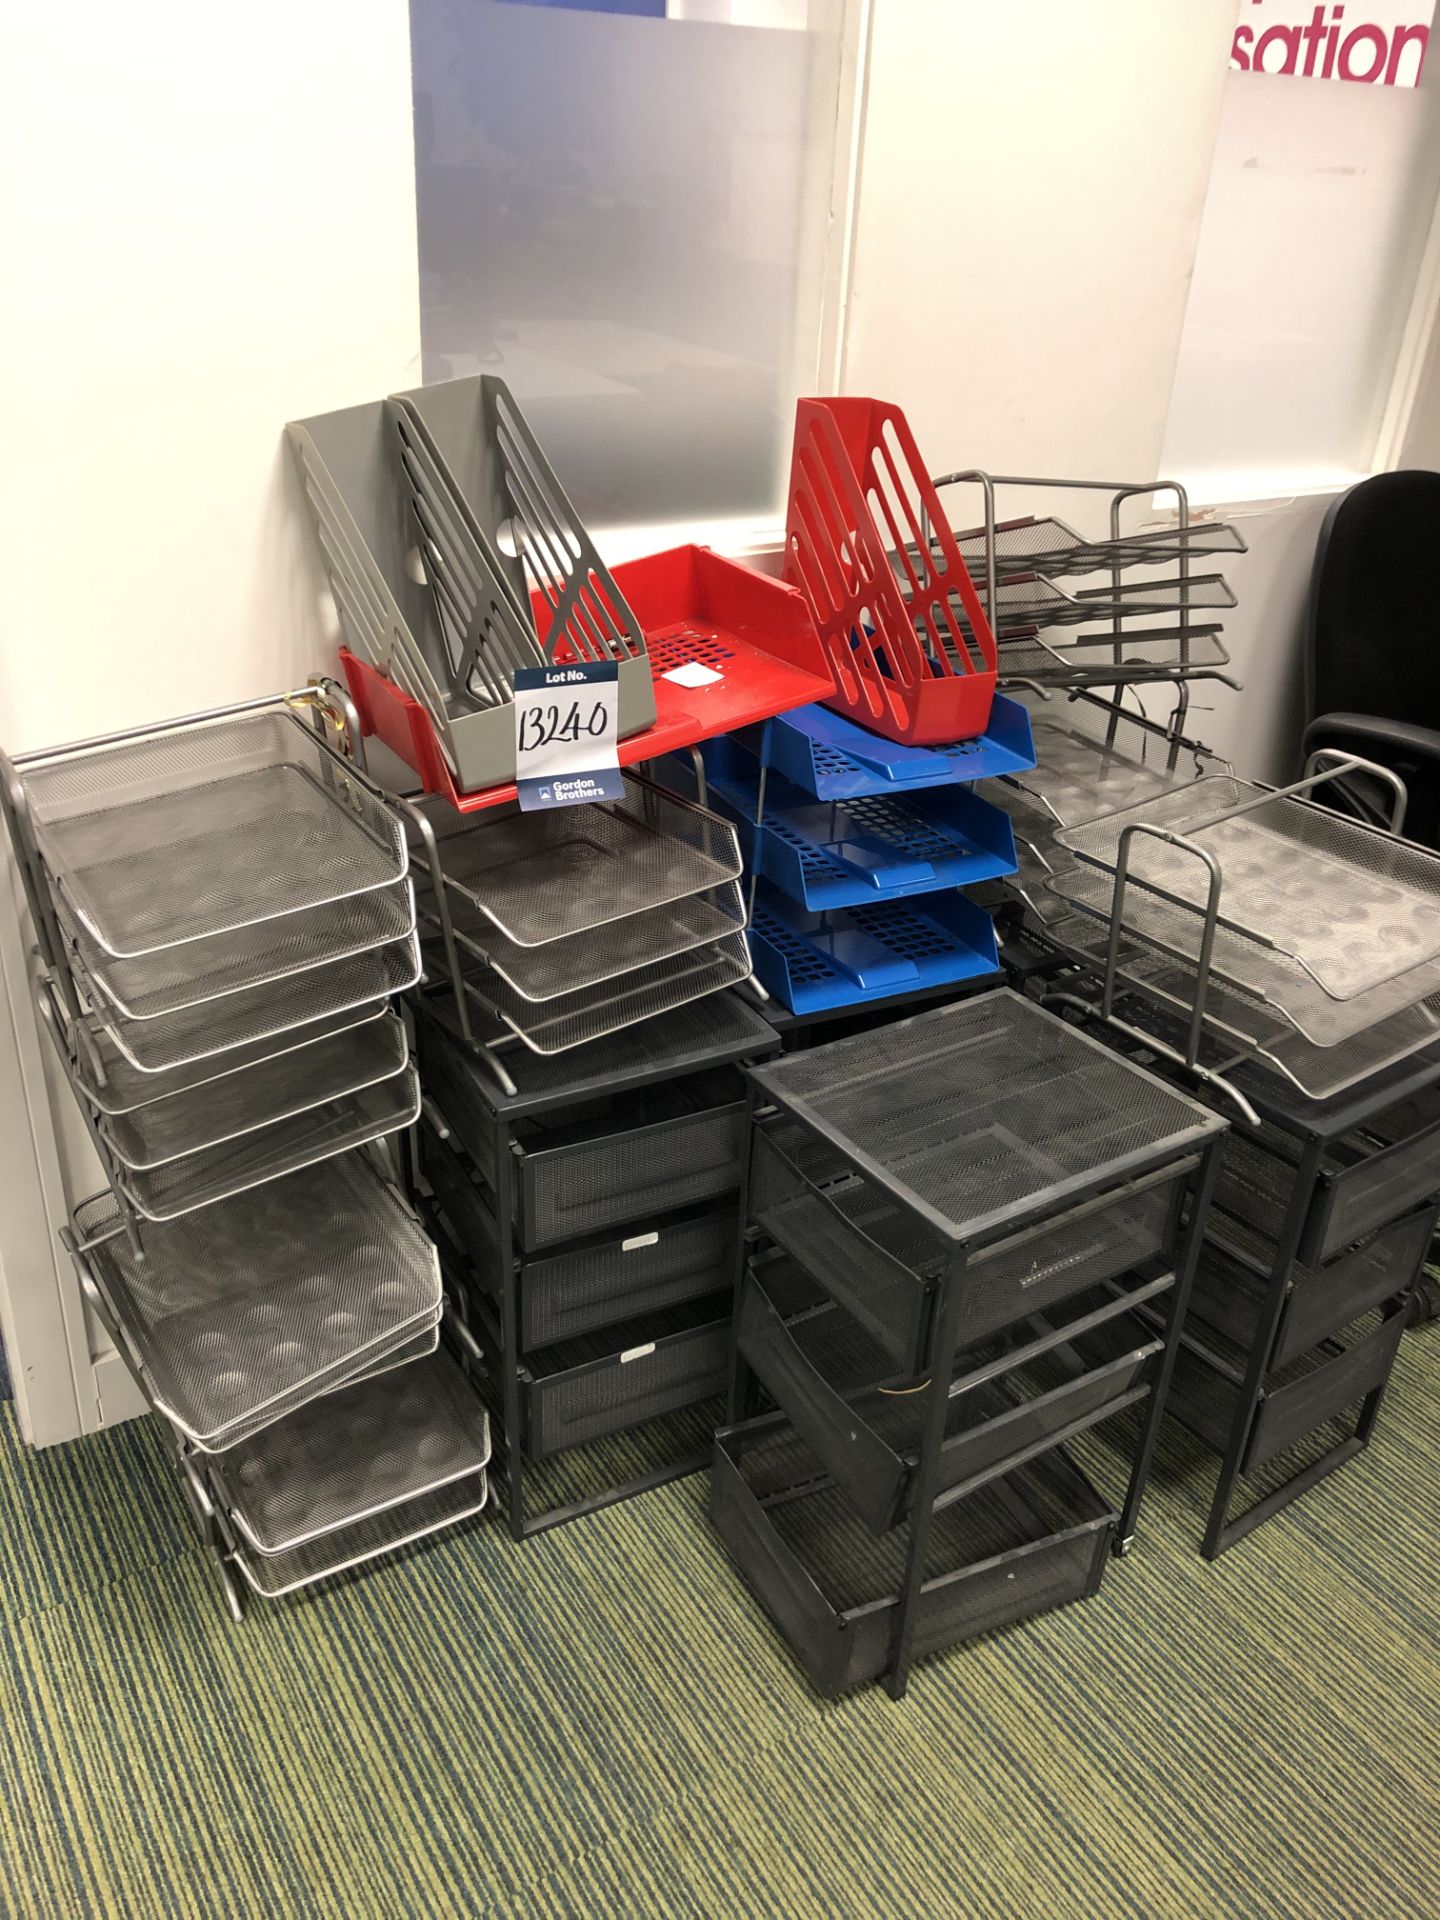 Quantity desk tidy stands and drawer units